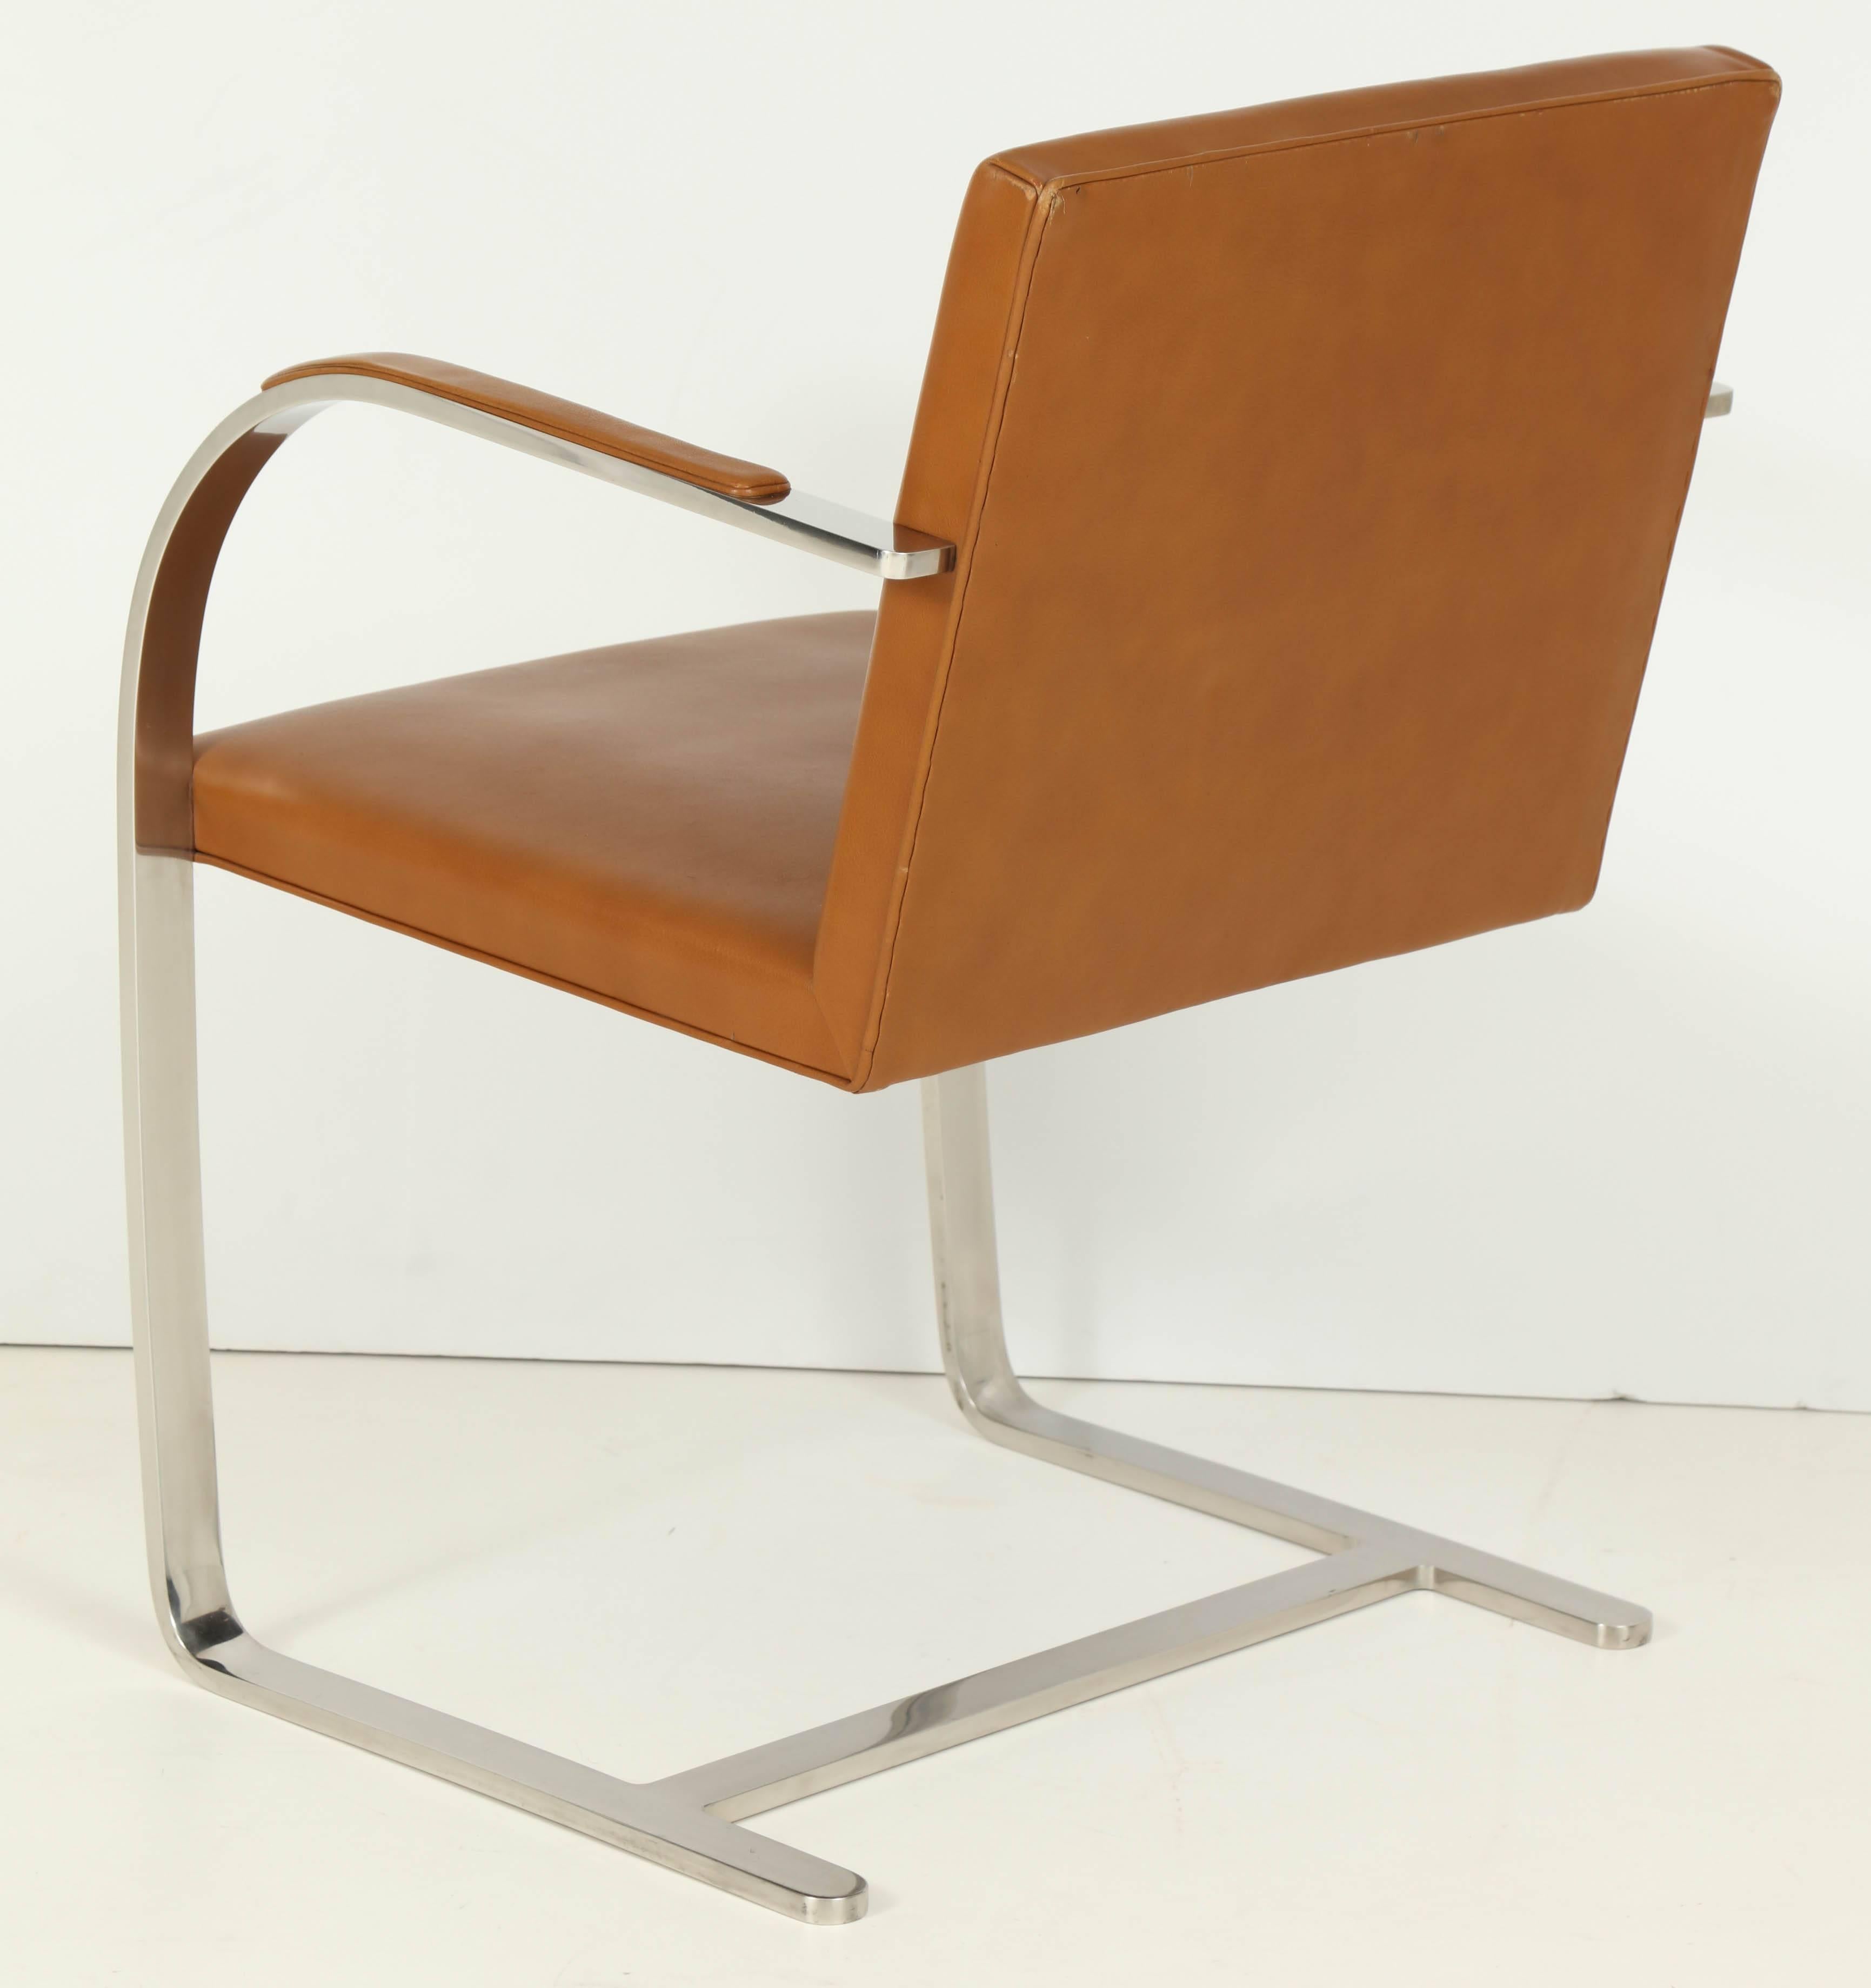 Leather Pair of Mies van der Rohe Brno Chairs by Knoll, circa 1960s